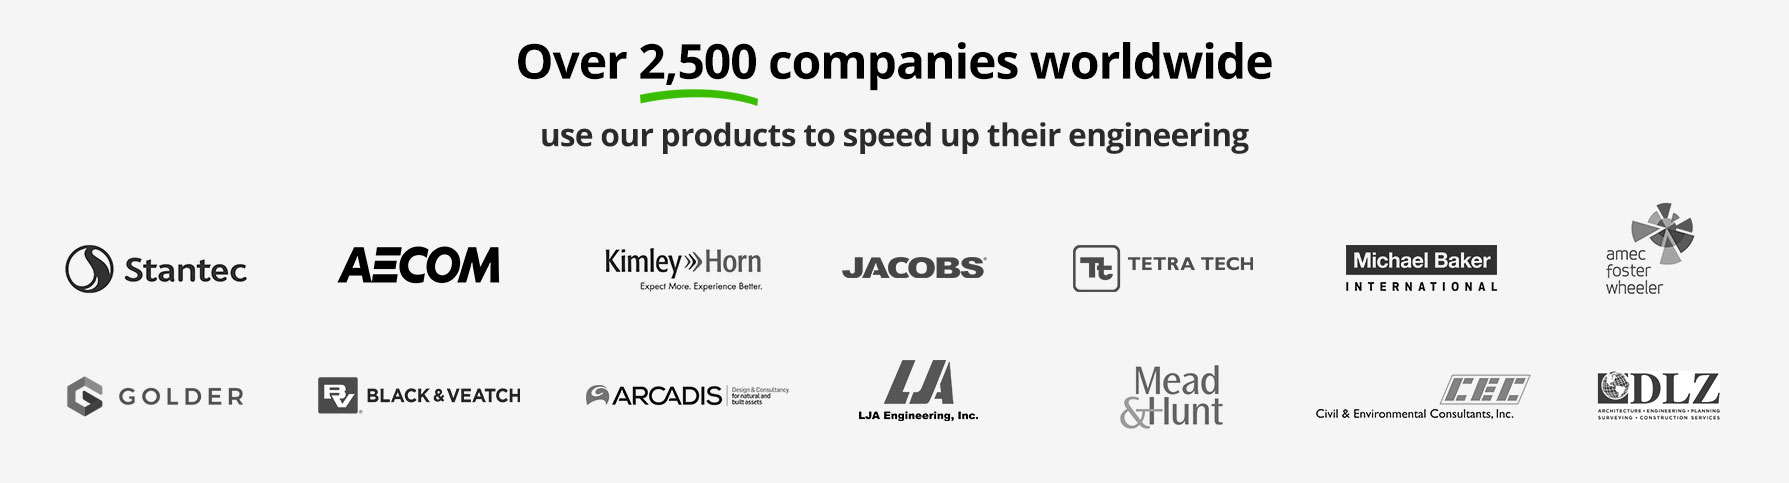 Over 2500 companies like Stantec, AECOM, Kimley Horn, Jacobs, Tetra Tech, Michael Baker, Amec Foster Wheeler, Golder use our HEC-RAS and HEC-HMS software to speed up their engineering workflows